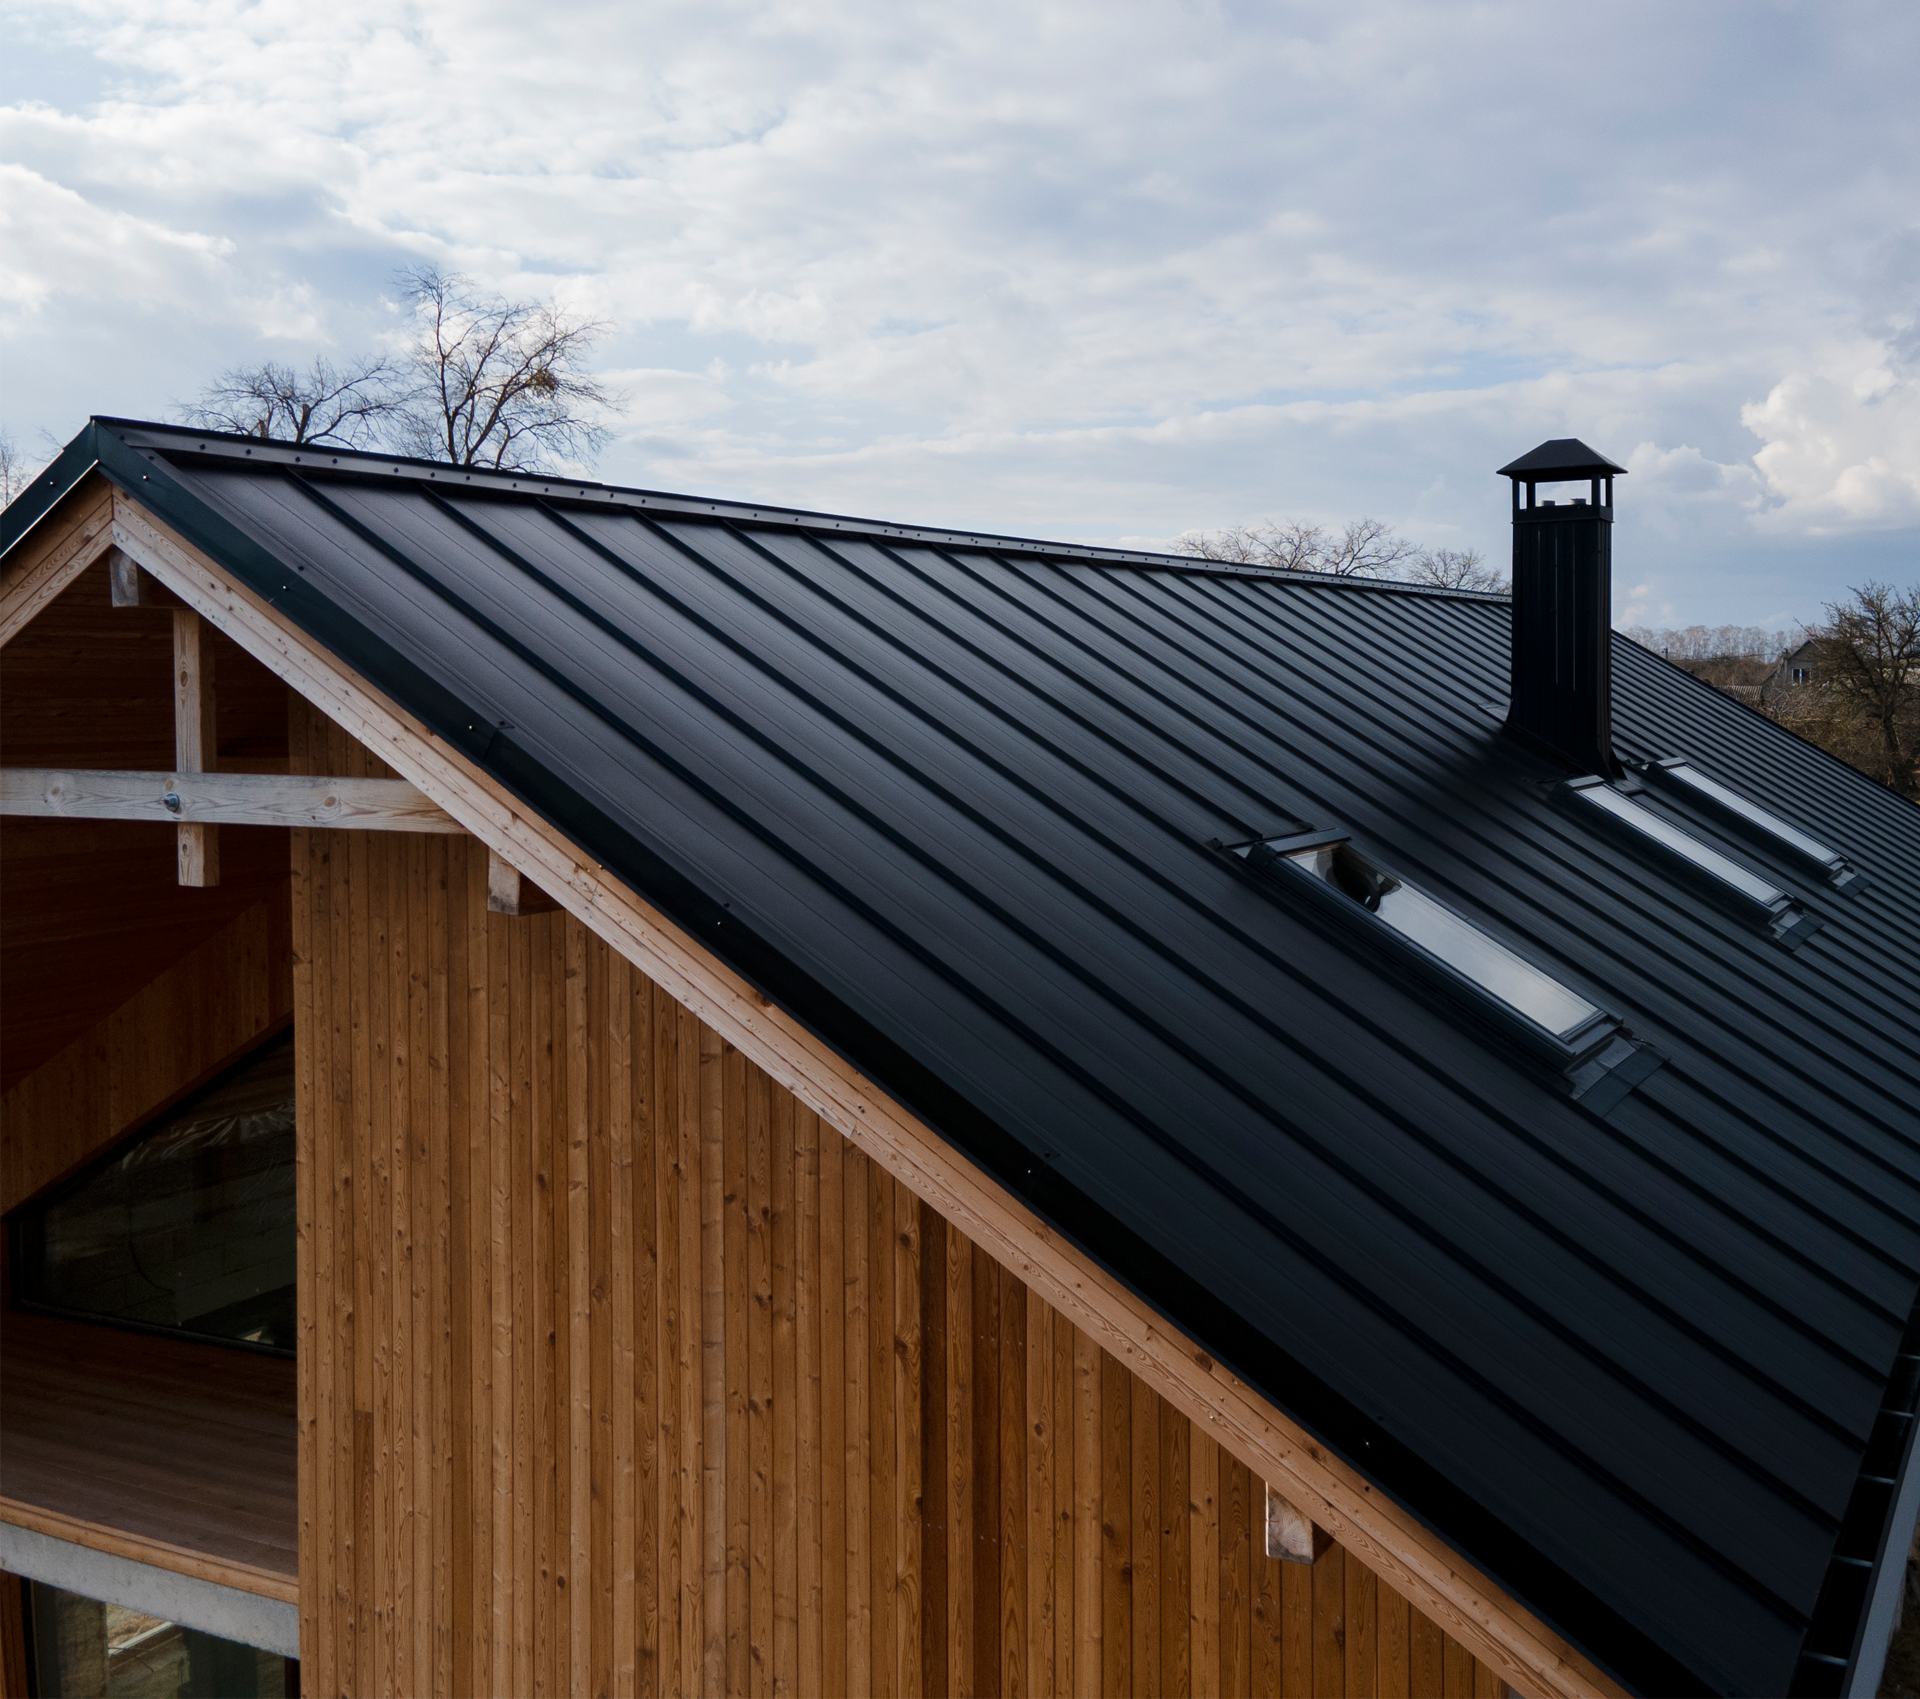 A wooden house with a black roof and skylights